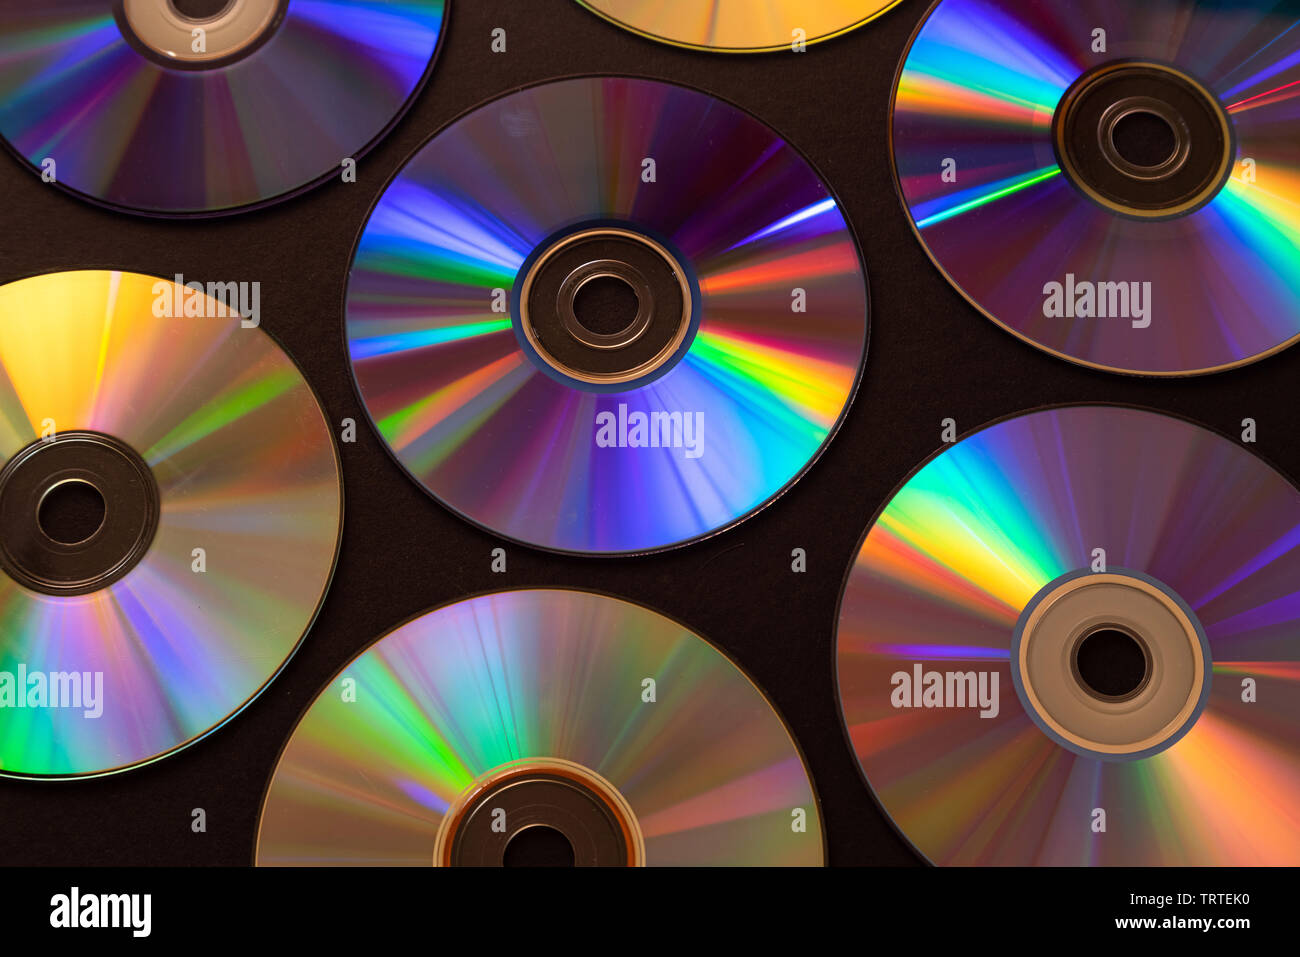 Vintage CD or DVD disk background, old circle discs used for data